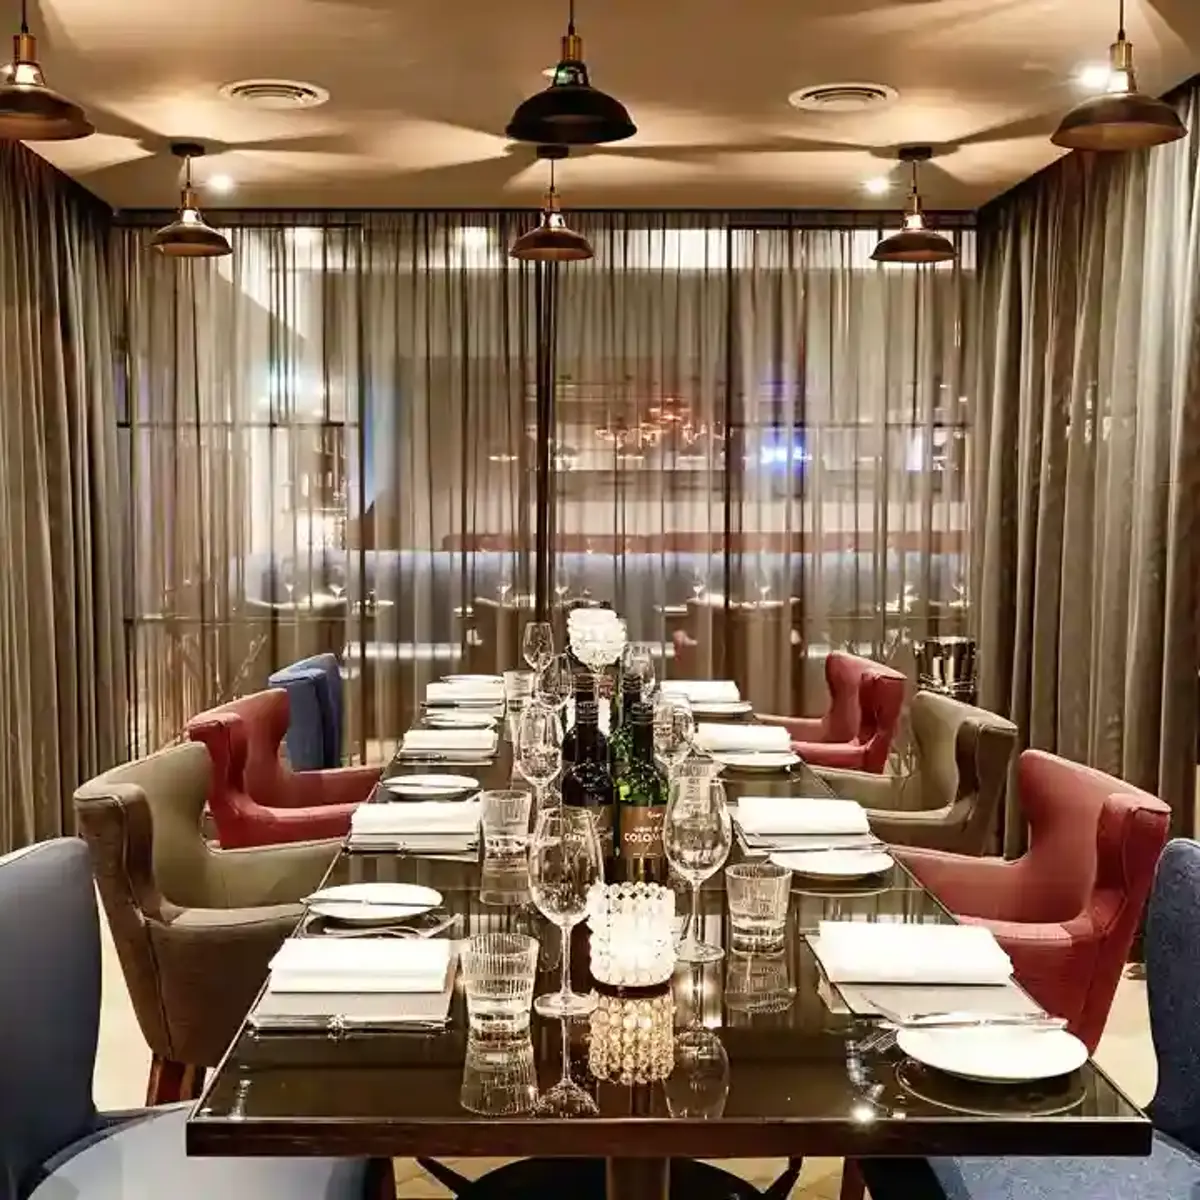 Another angle of The Cage dining room featuring a lengthy table adorned with blue, red and gold chairs, curtained glass walls, and brass light fixtures.